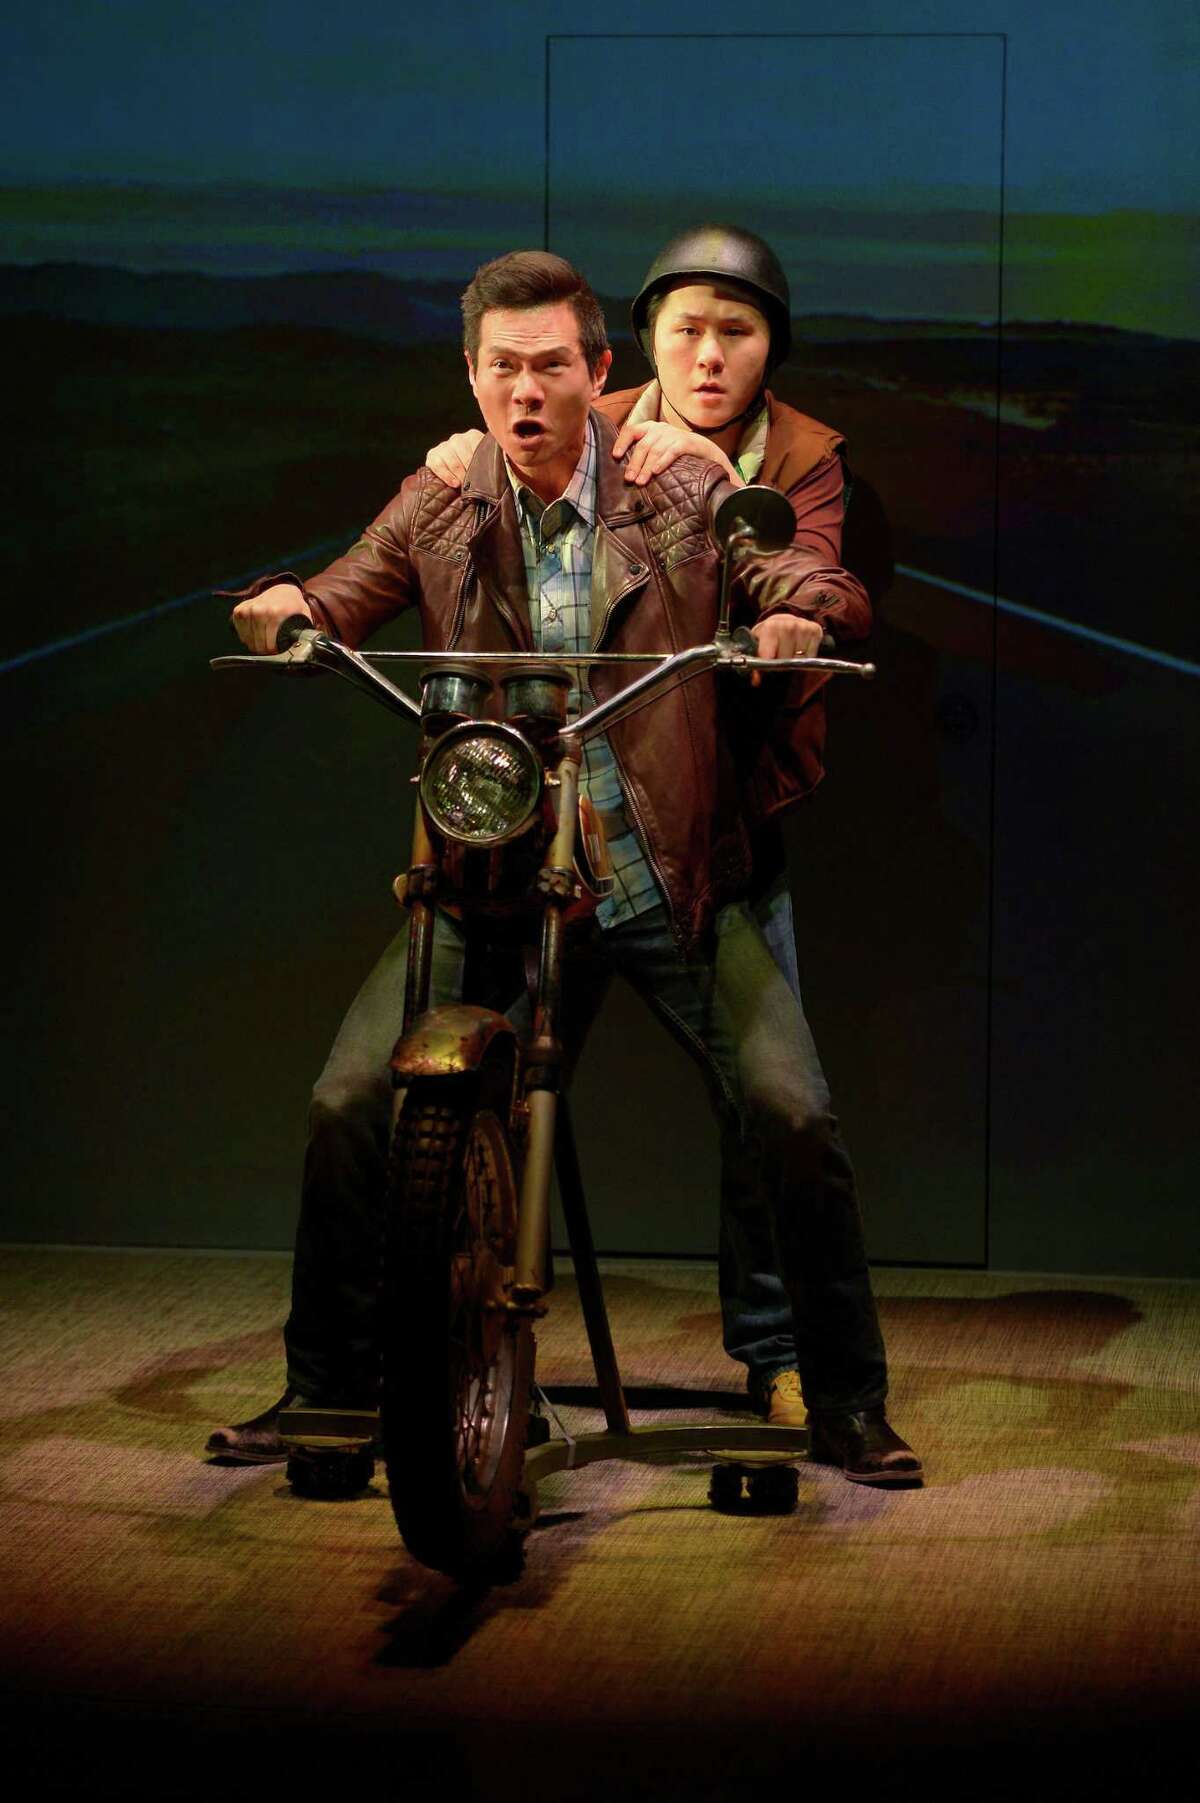 Quang (James Seol, front) and friend Nhan (Stephen Hu, back) in American Conservatory Theater's "Vietgone."